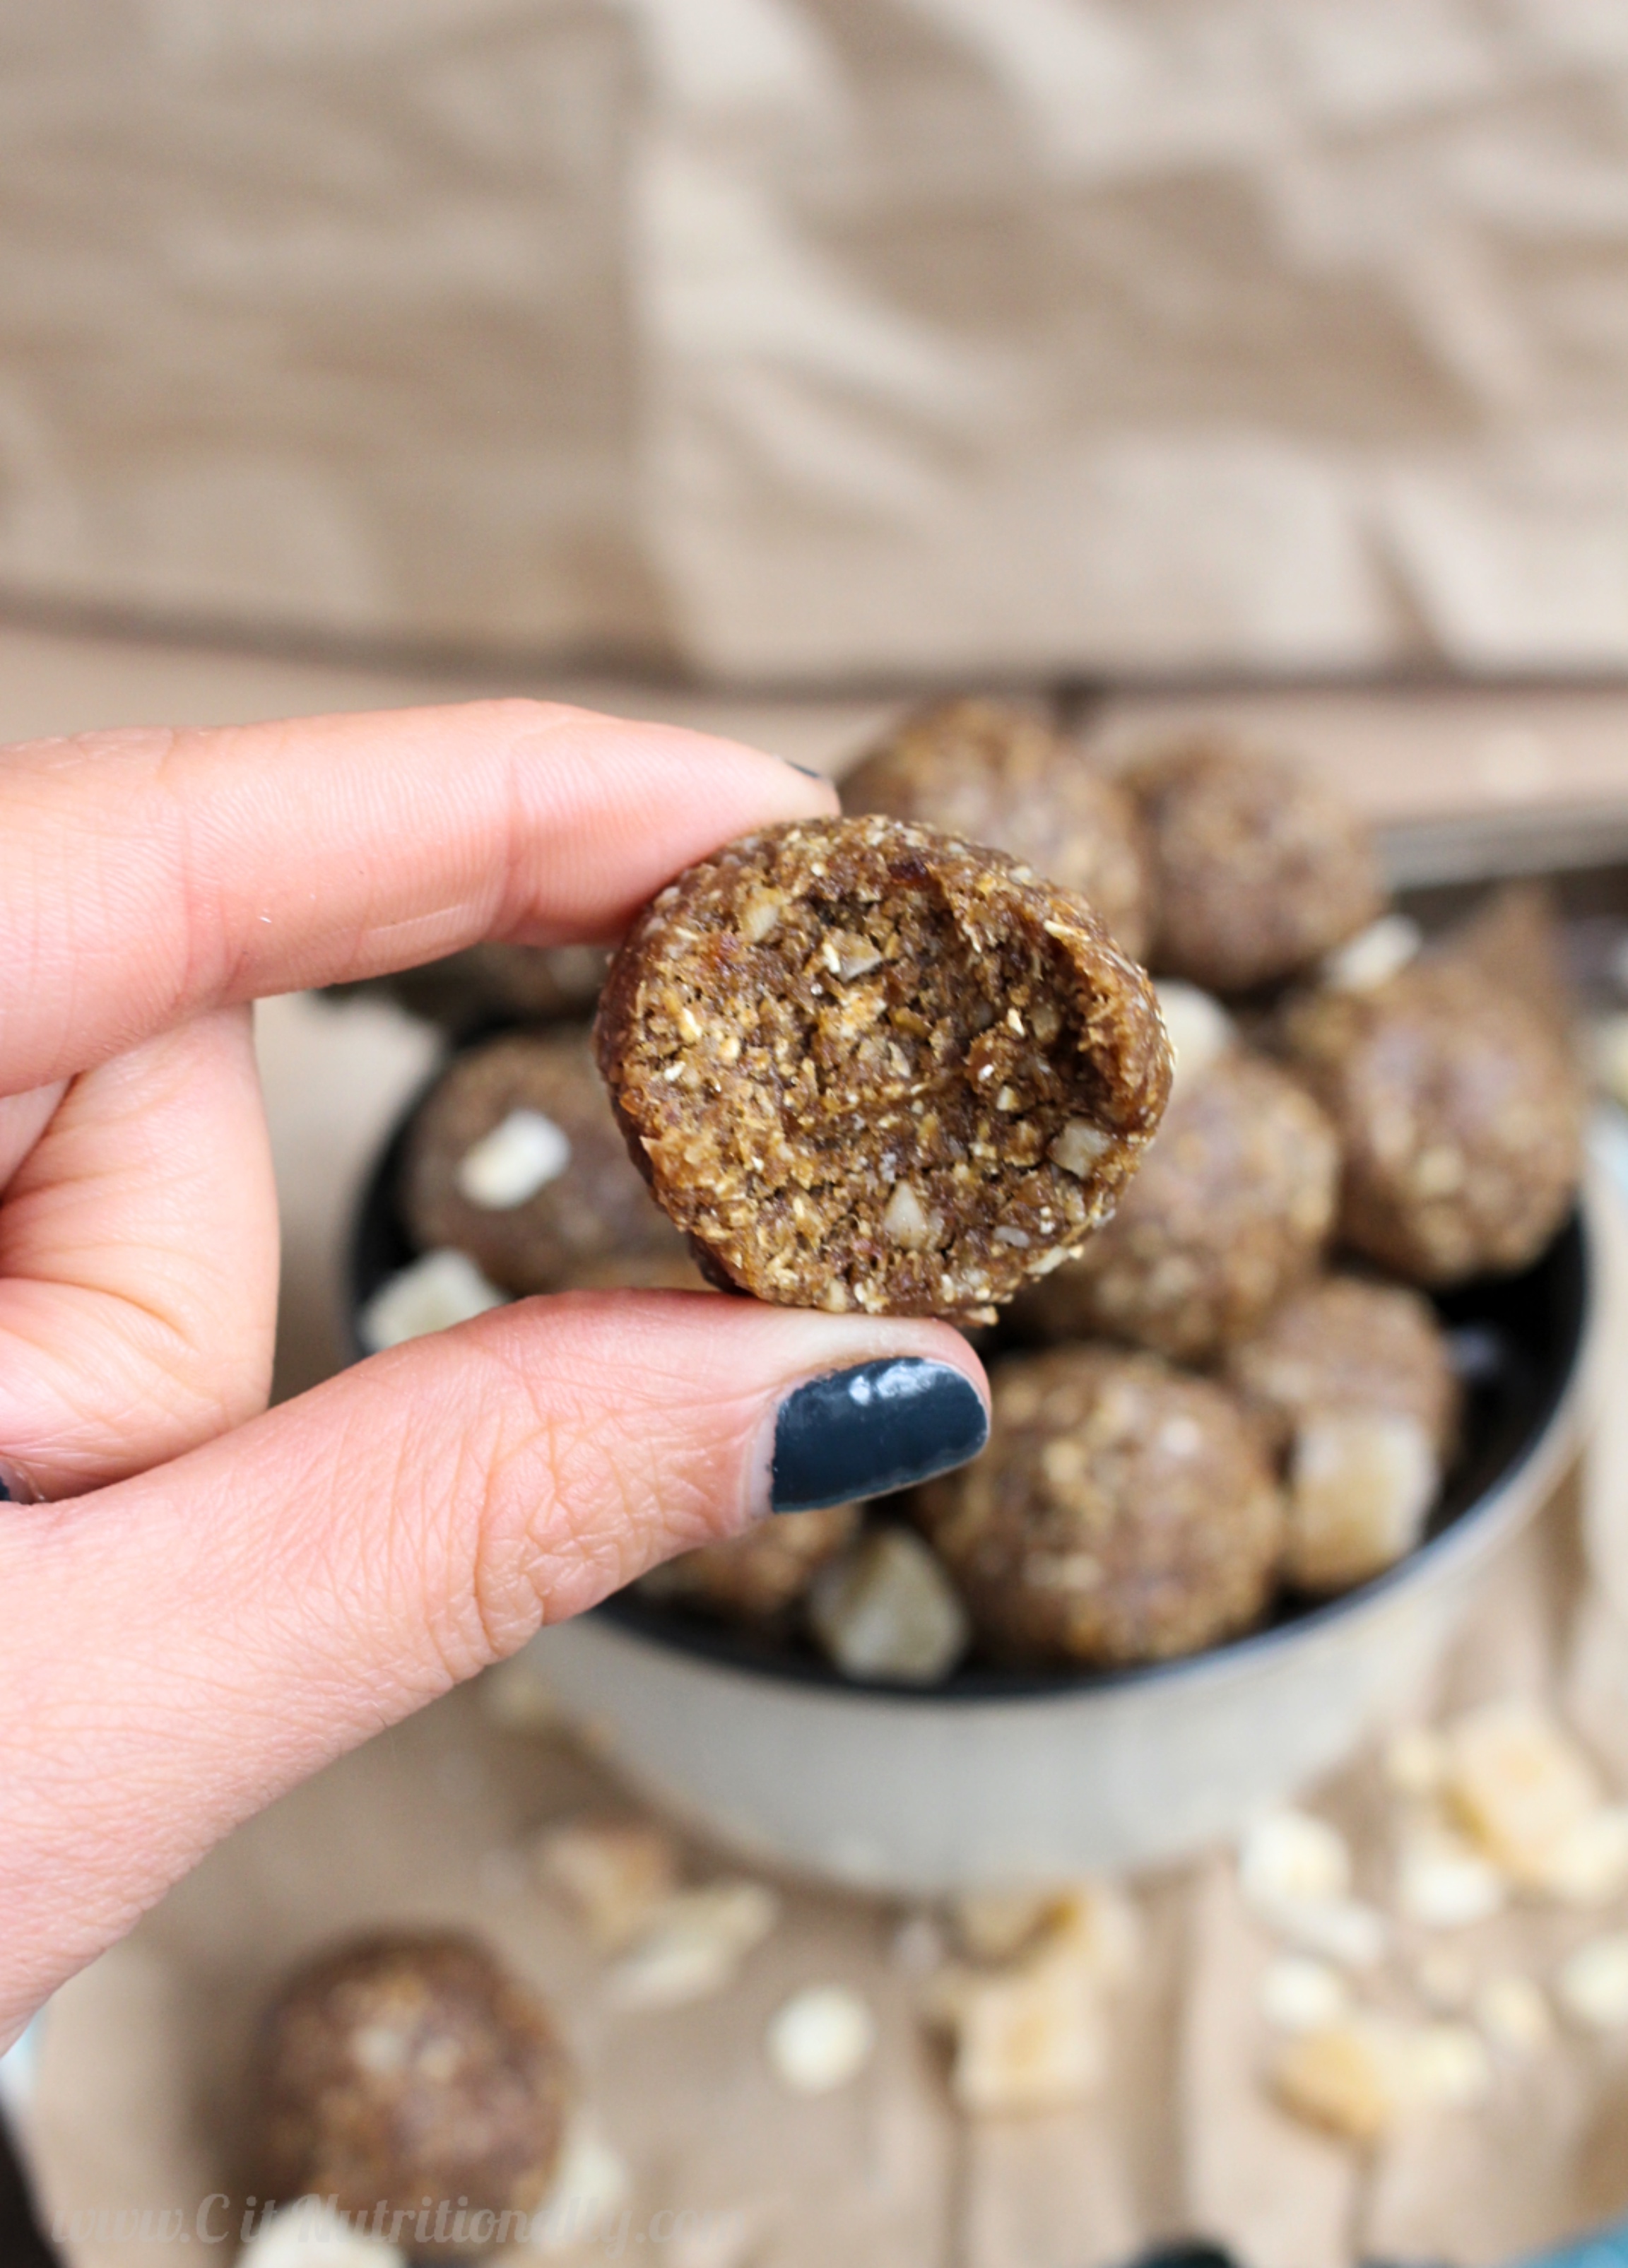 Healthy Gingerbread Cookie Energy Bites | C it Nutritionally